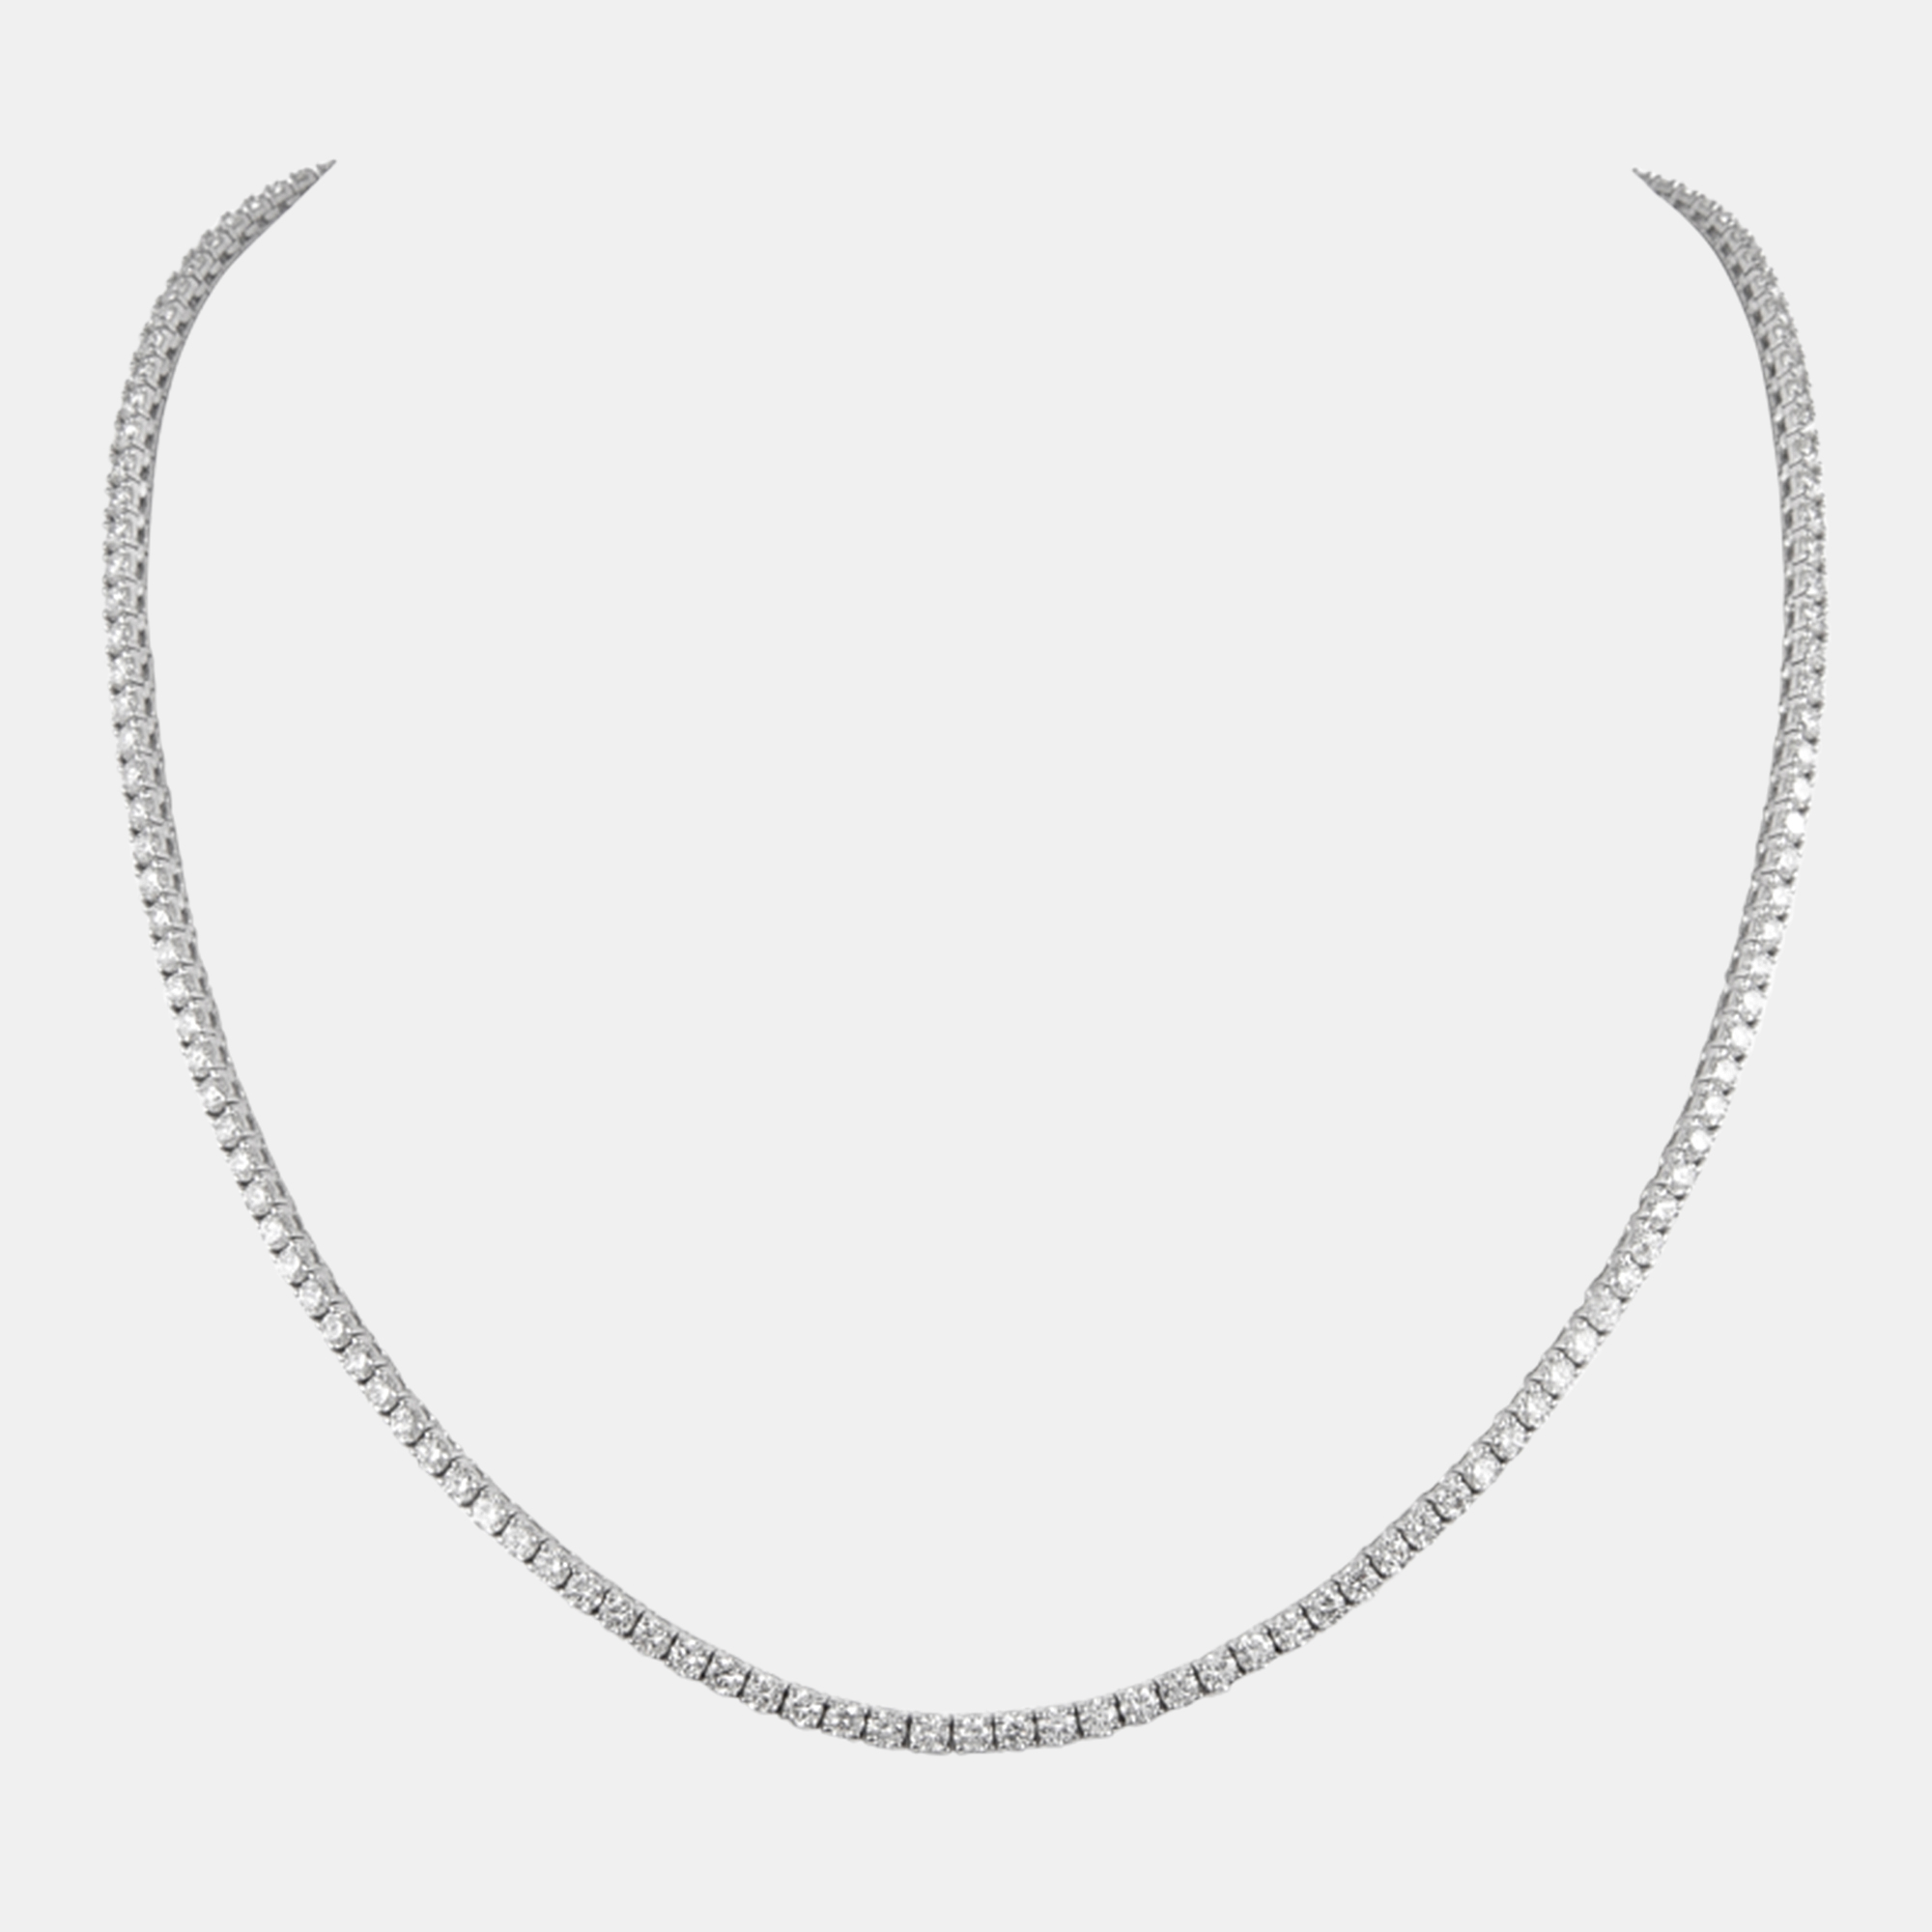 Pre-owned The Diamond Edit 18k White Gold Diamond 0.05 Ct. (each) Tennis Necklace